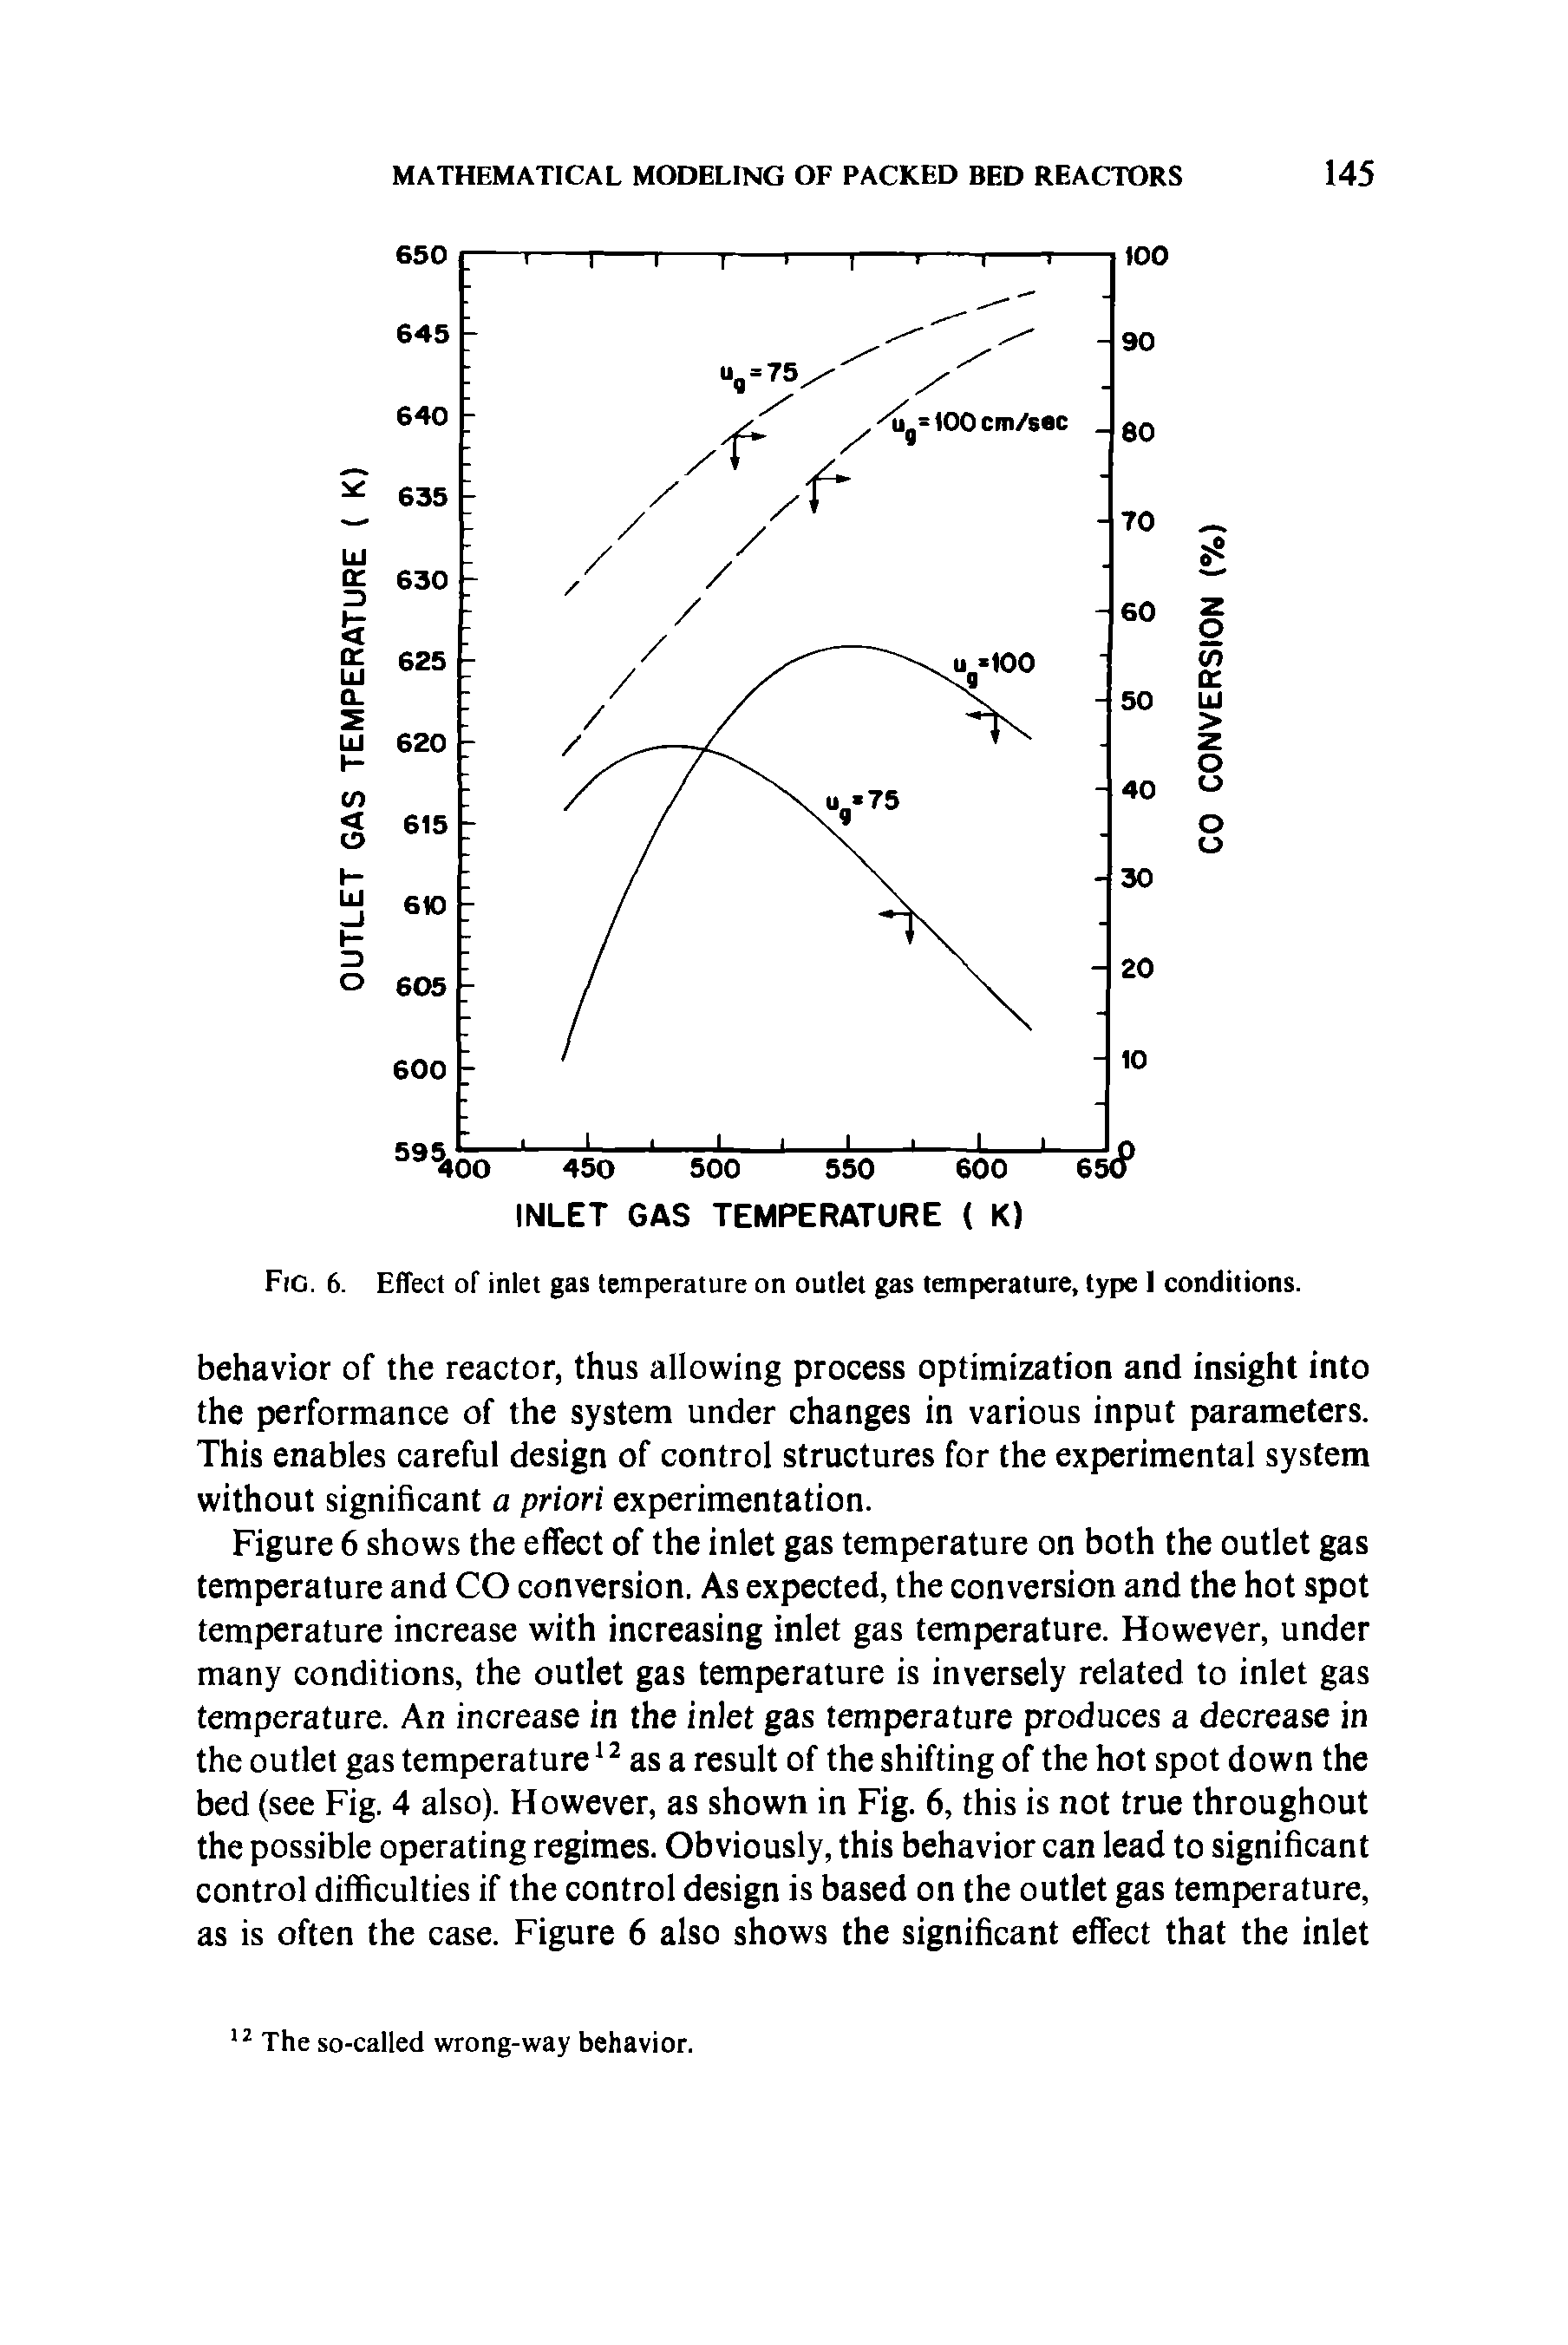 Fig. 6. Effect of inlet gas temperature on outlet gas temperature, type I conditions.